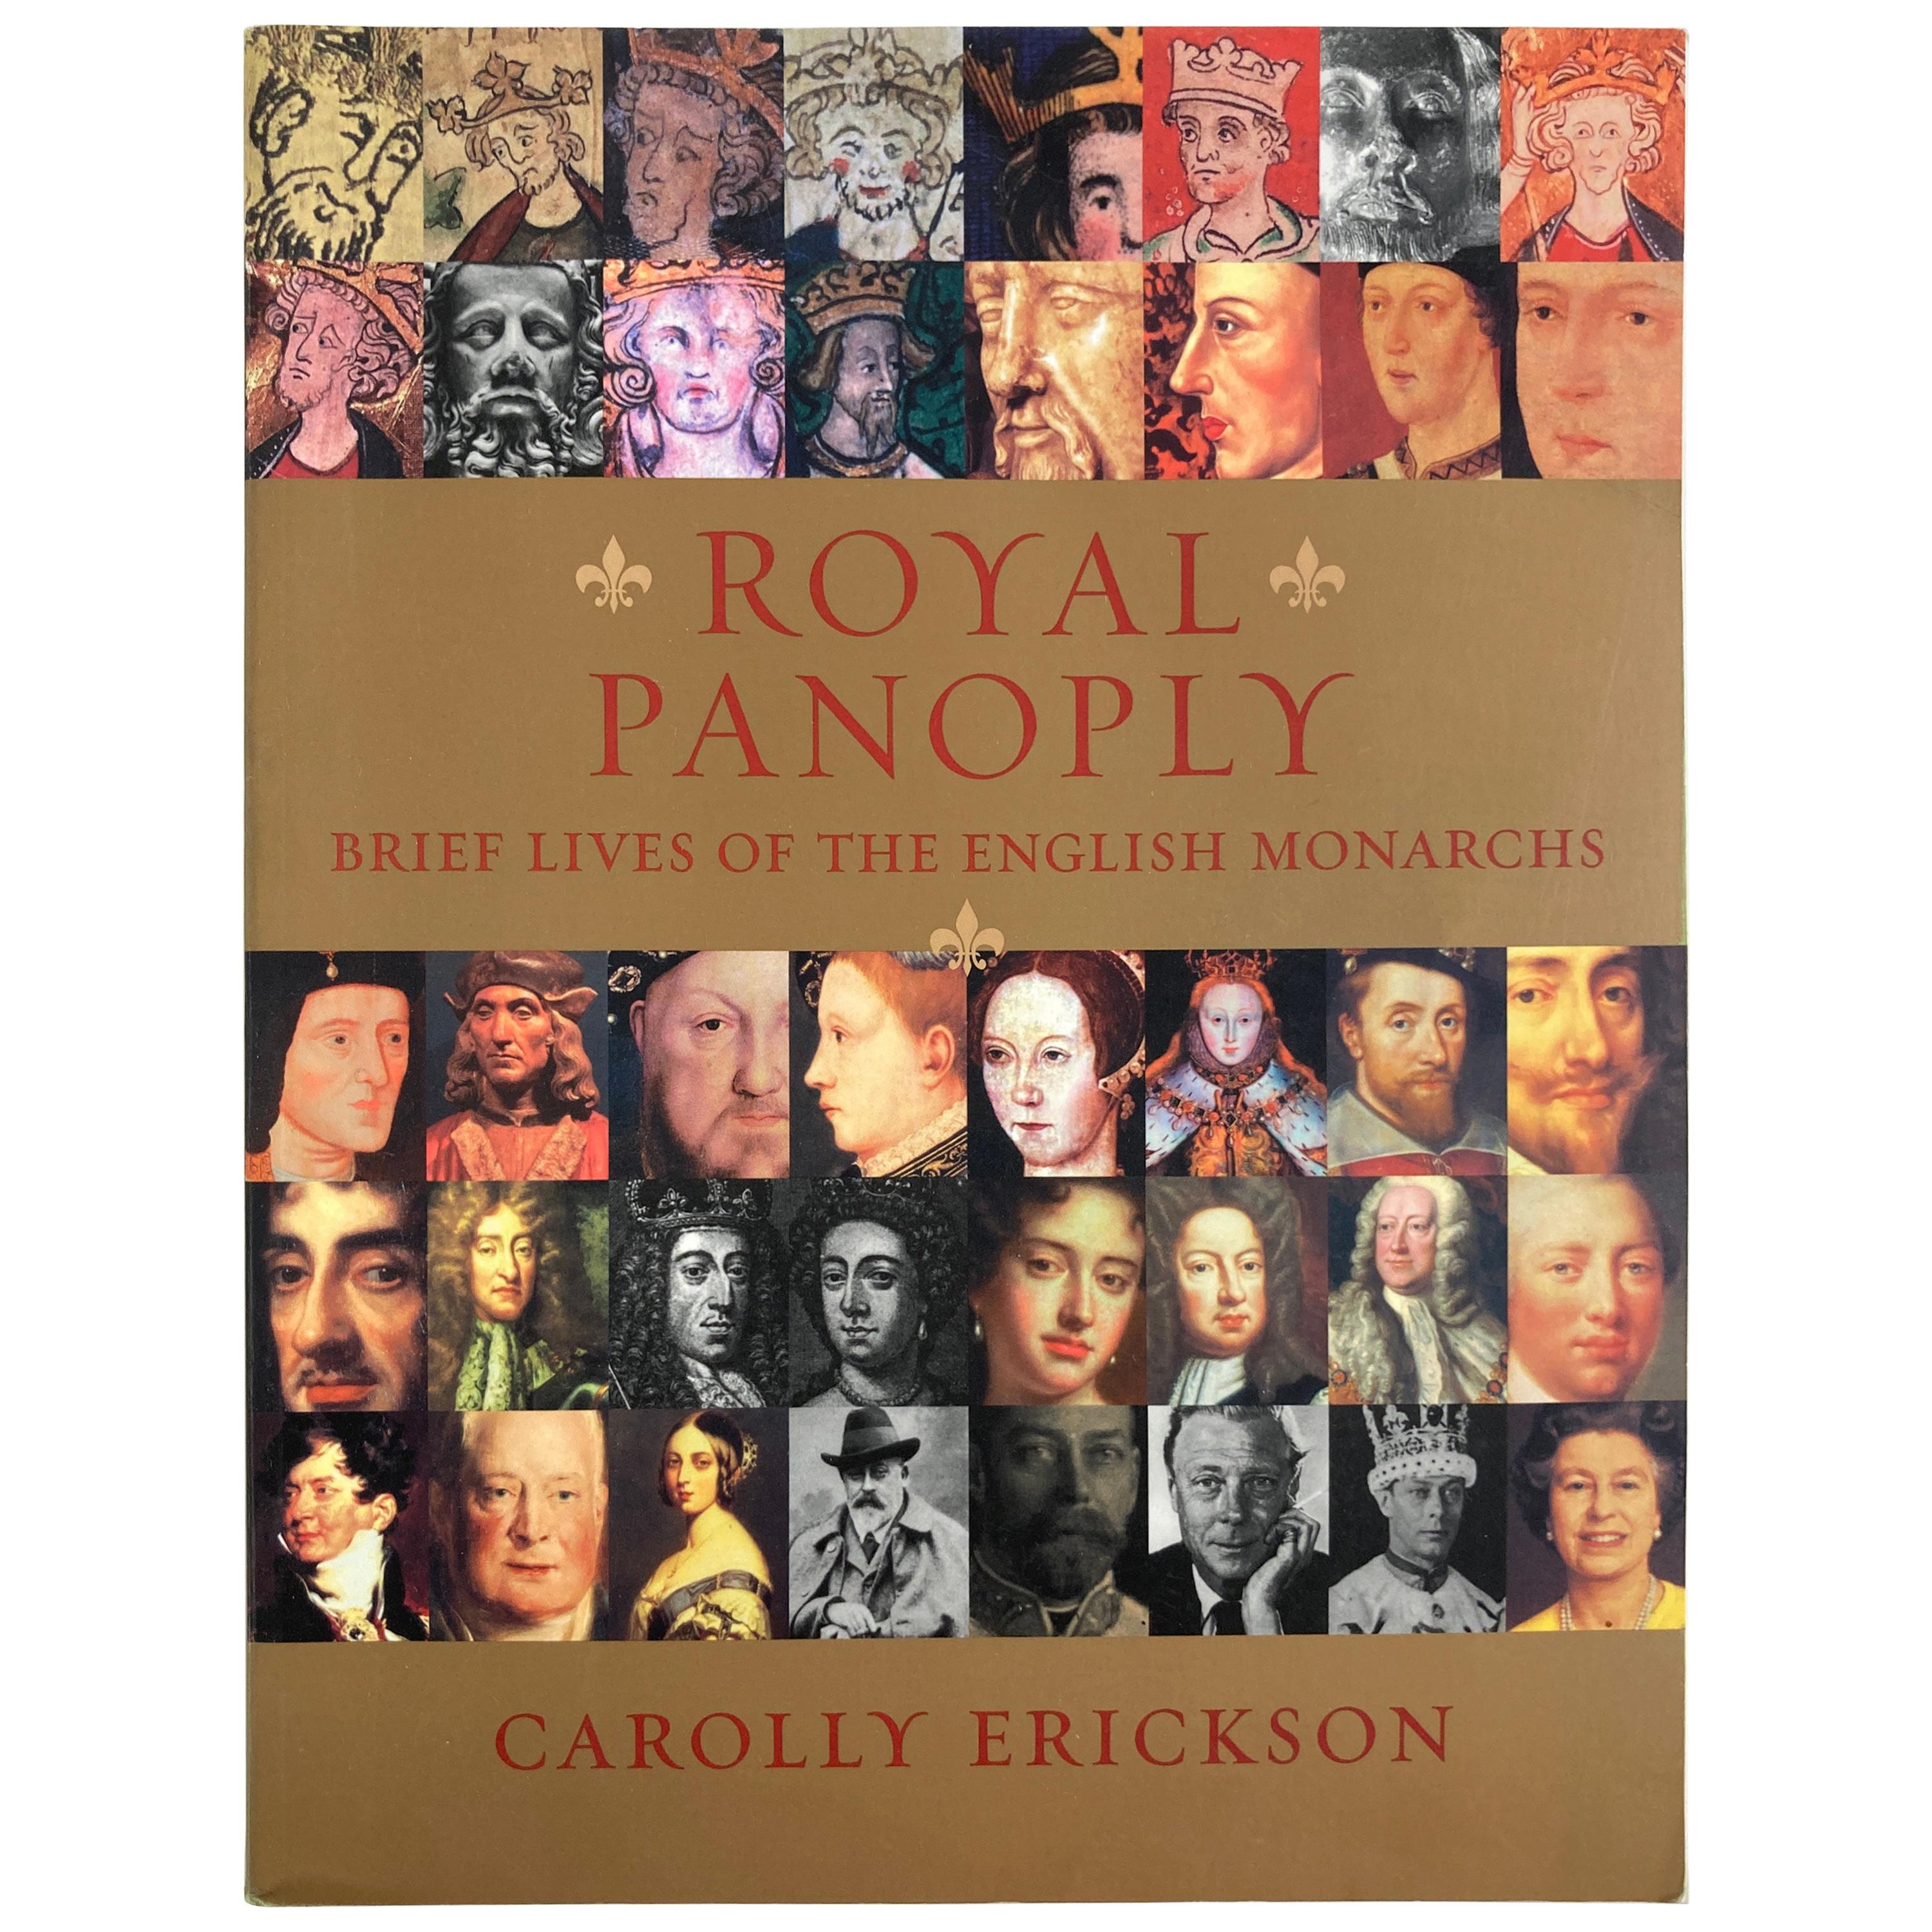 Royal Panoply Brief Lives of the English Monarchs by Carolly Erickson Book For Sale